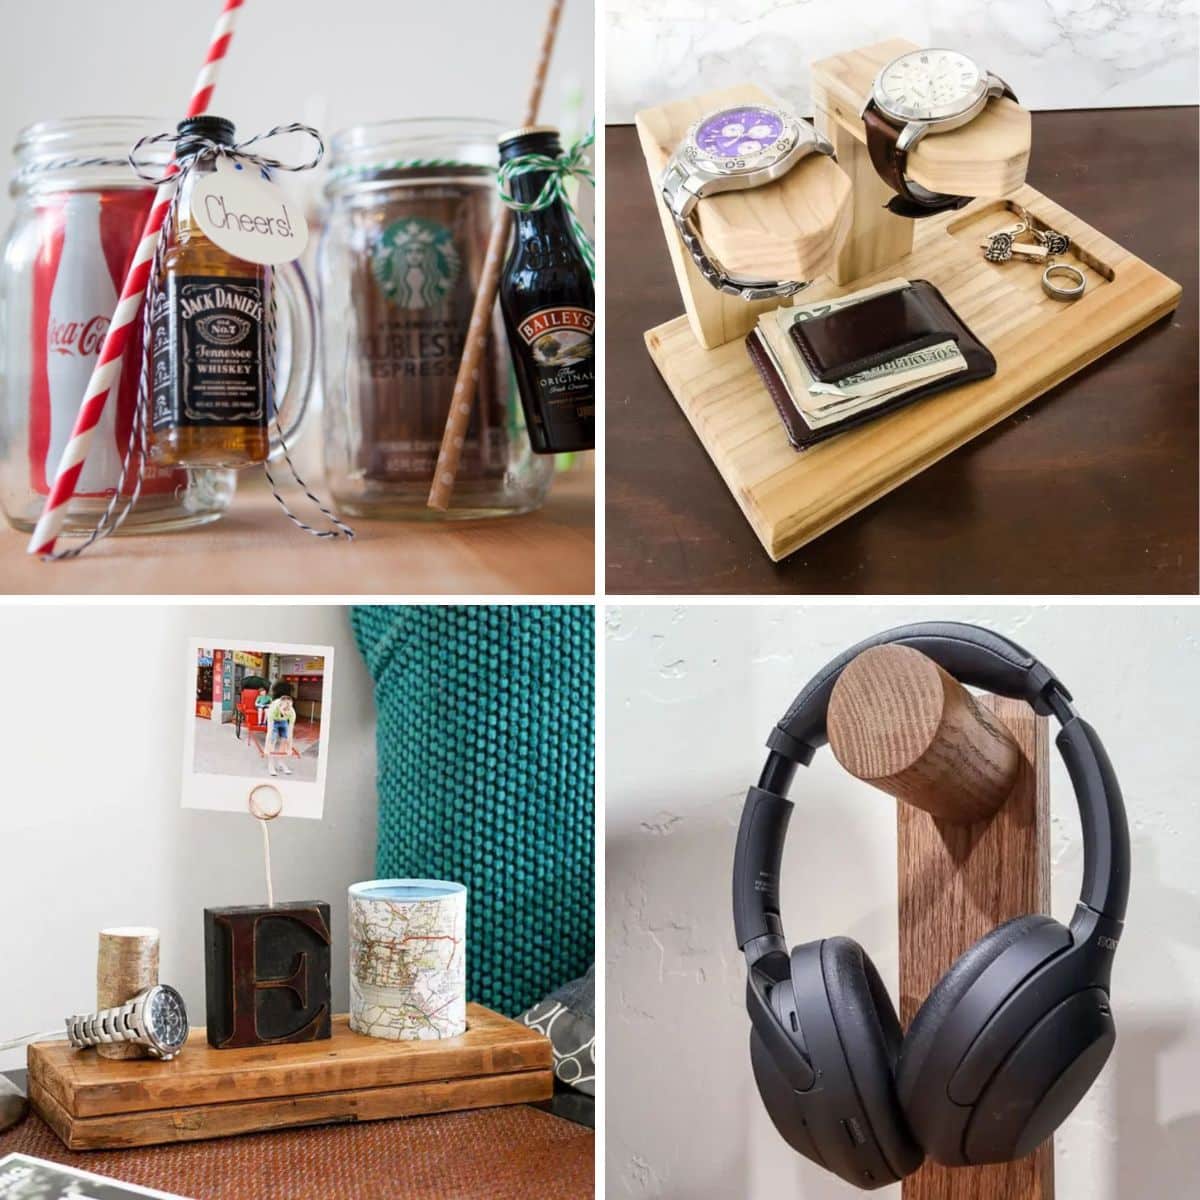 20+ Handmade Gift Ideas for Teens - The Birch Cottage